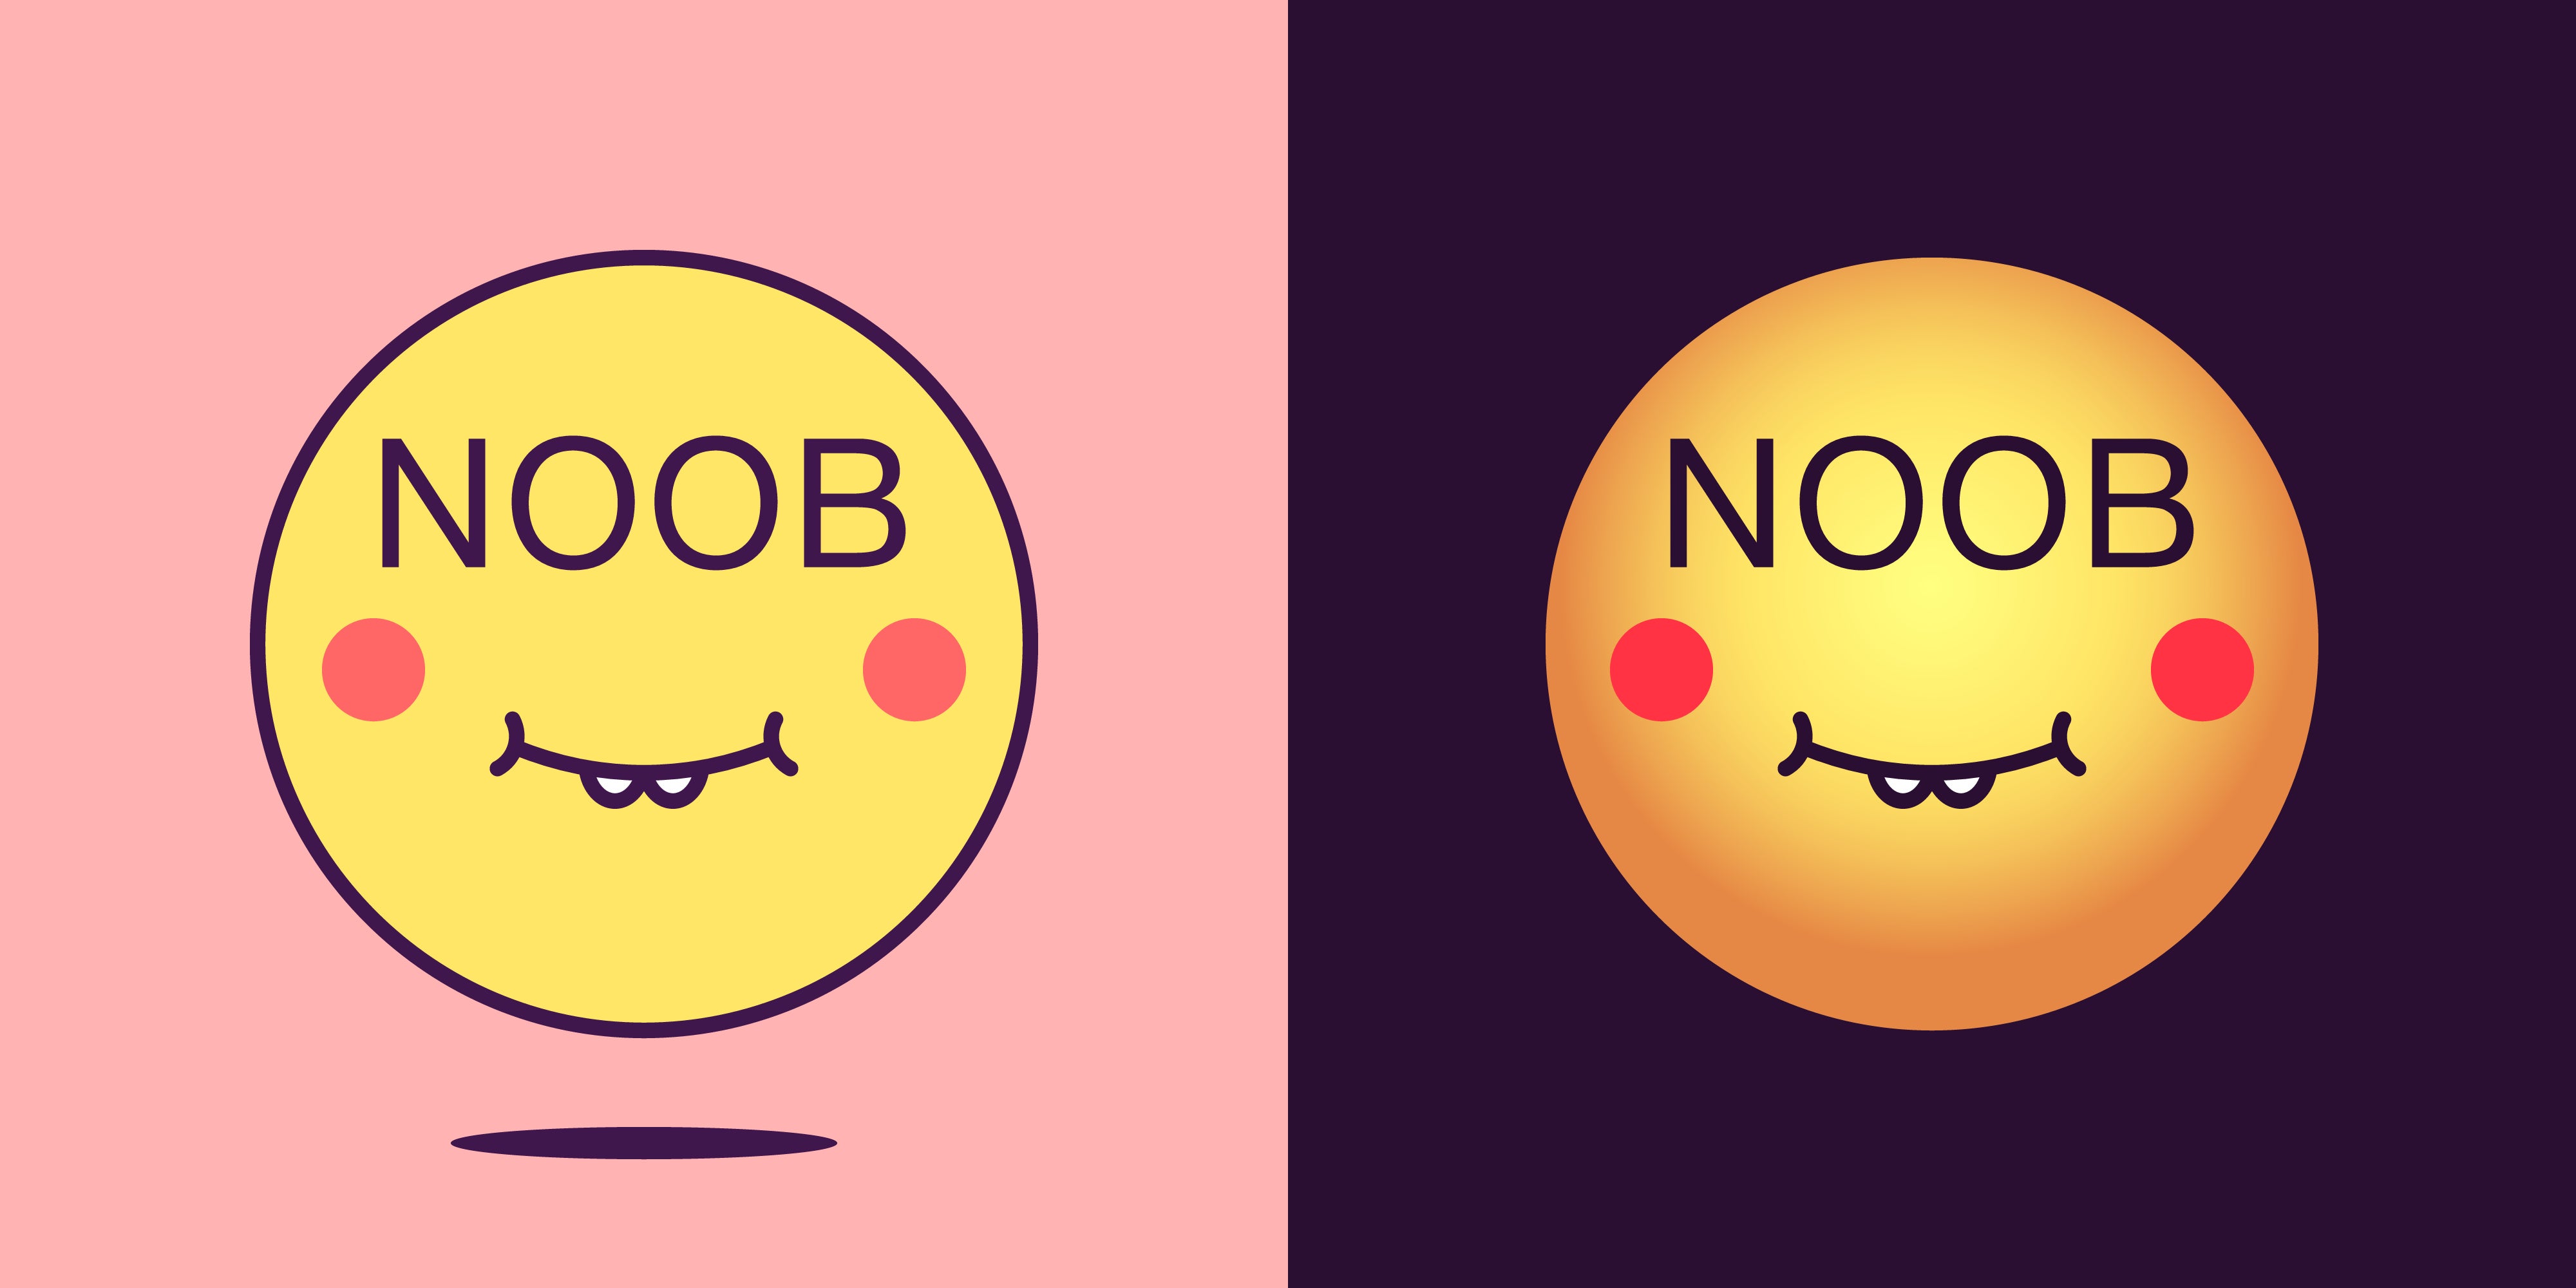 Emoji with two teeth sticking out saying "noob" over where eyes would be.